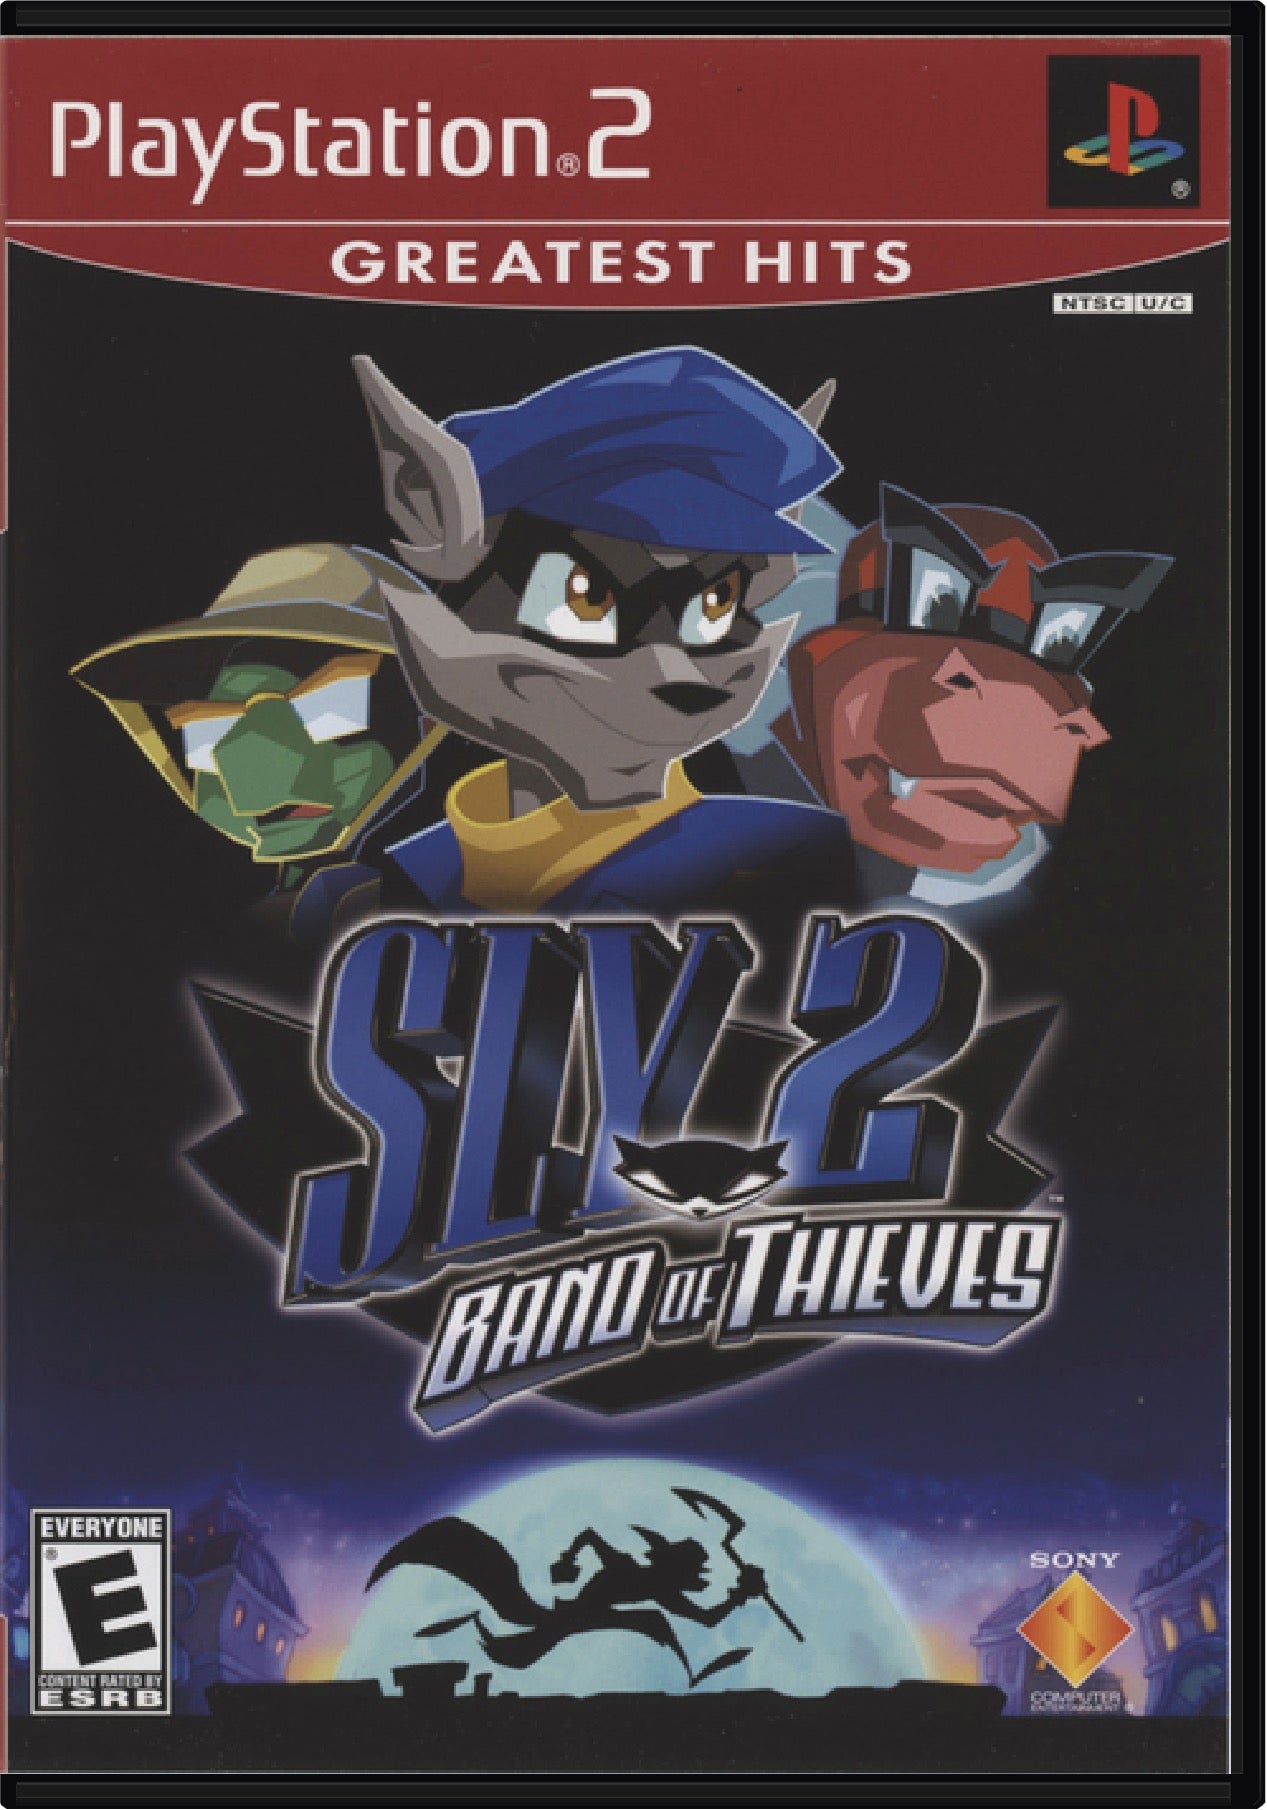 Sly 2 Band of Thieves Cover Art and Product Photo